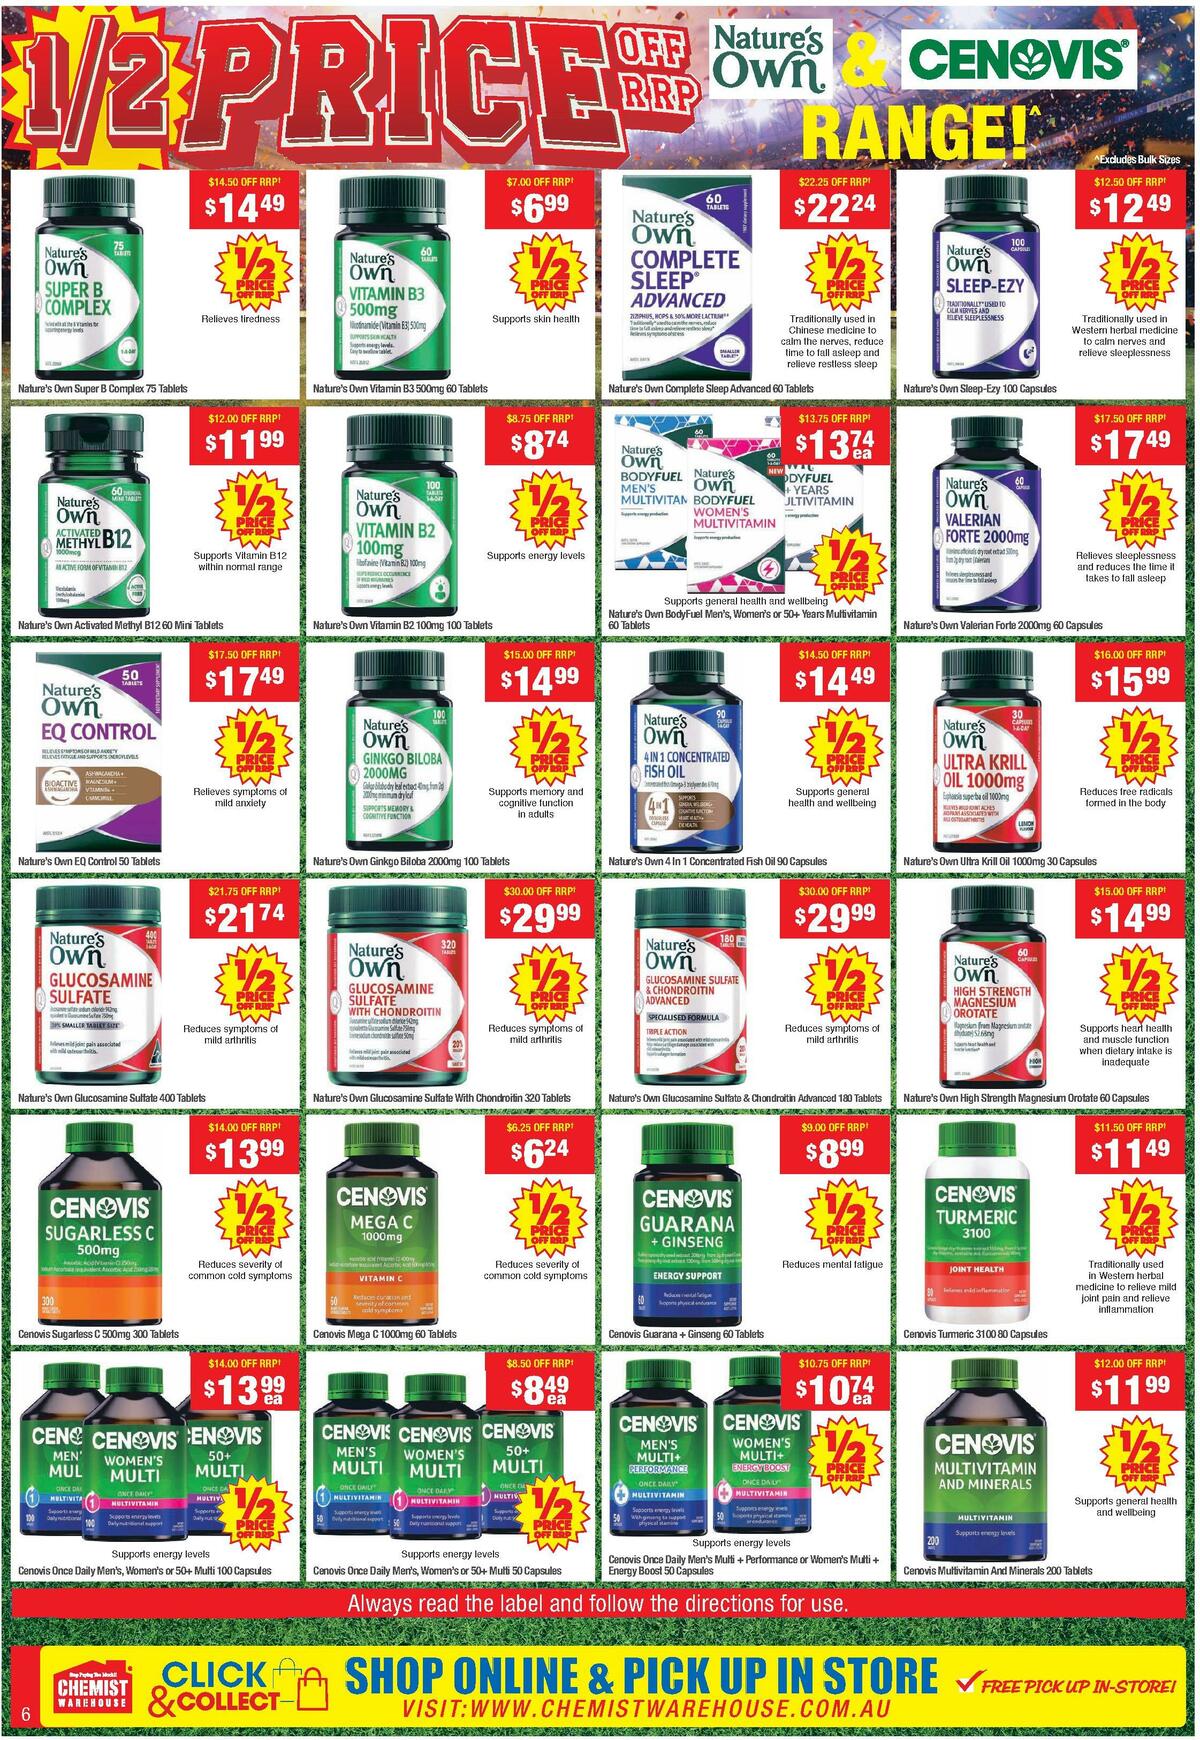 Chemist Warehouse House of Wellness Catalogues from 1 September